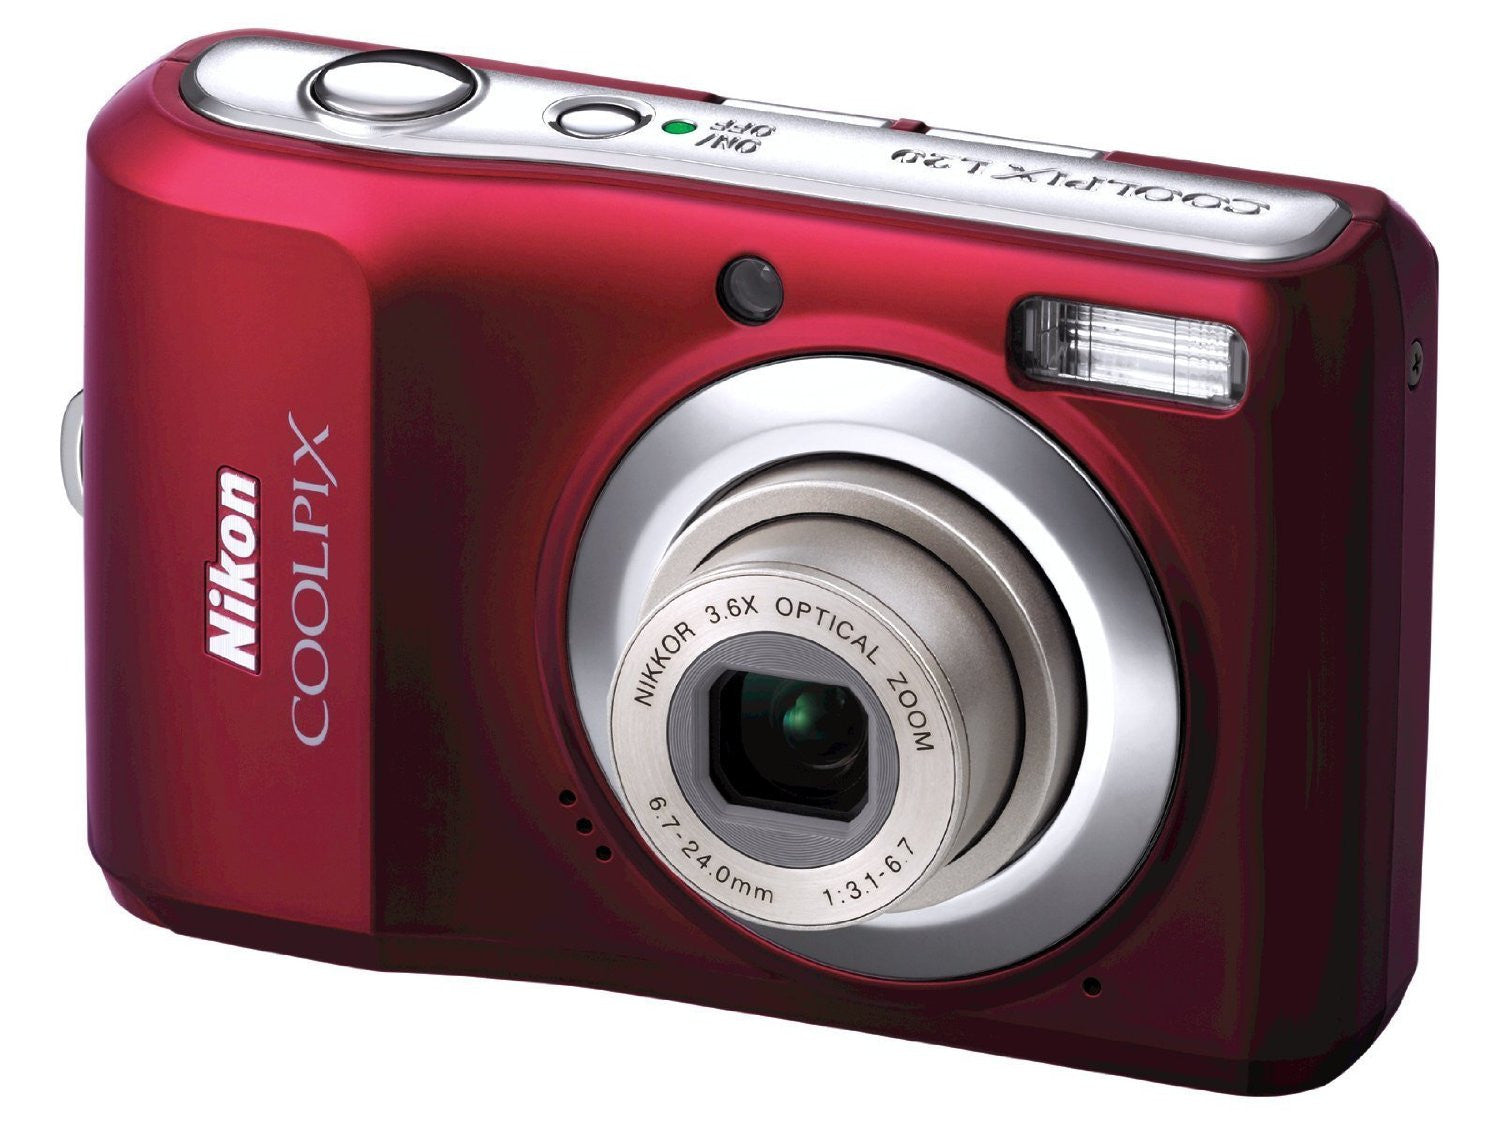 Nikon Coolpix L20 10MP Digital Camera with 3.6 Optical Zoom and 3 inch LCD, (Deep Red) - worldtradesolution.com
 - 3